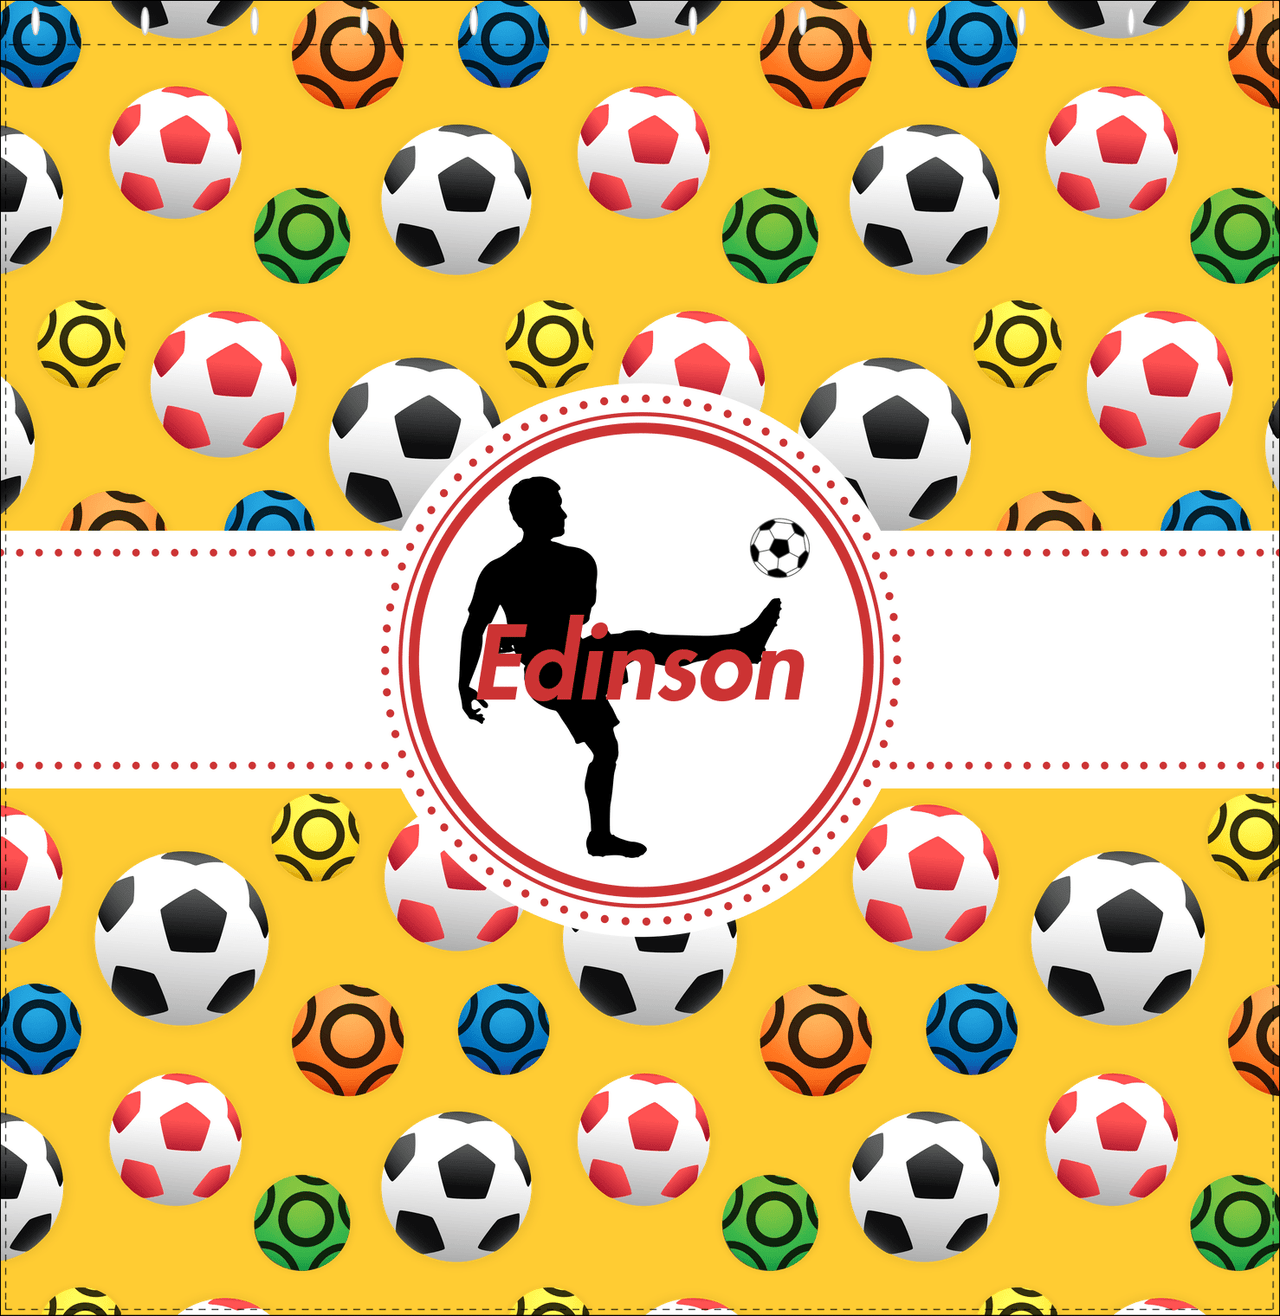 Personalized Soccer Shower Curtain XLVII - Yellow Background - Boy Silhouette II - Decorate View